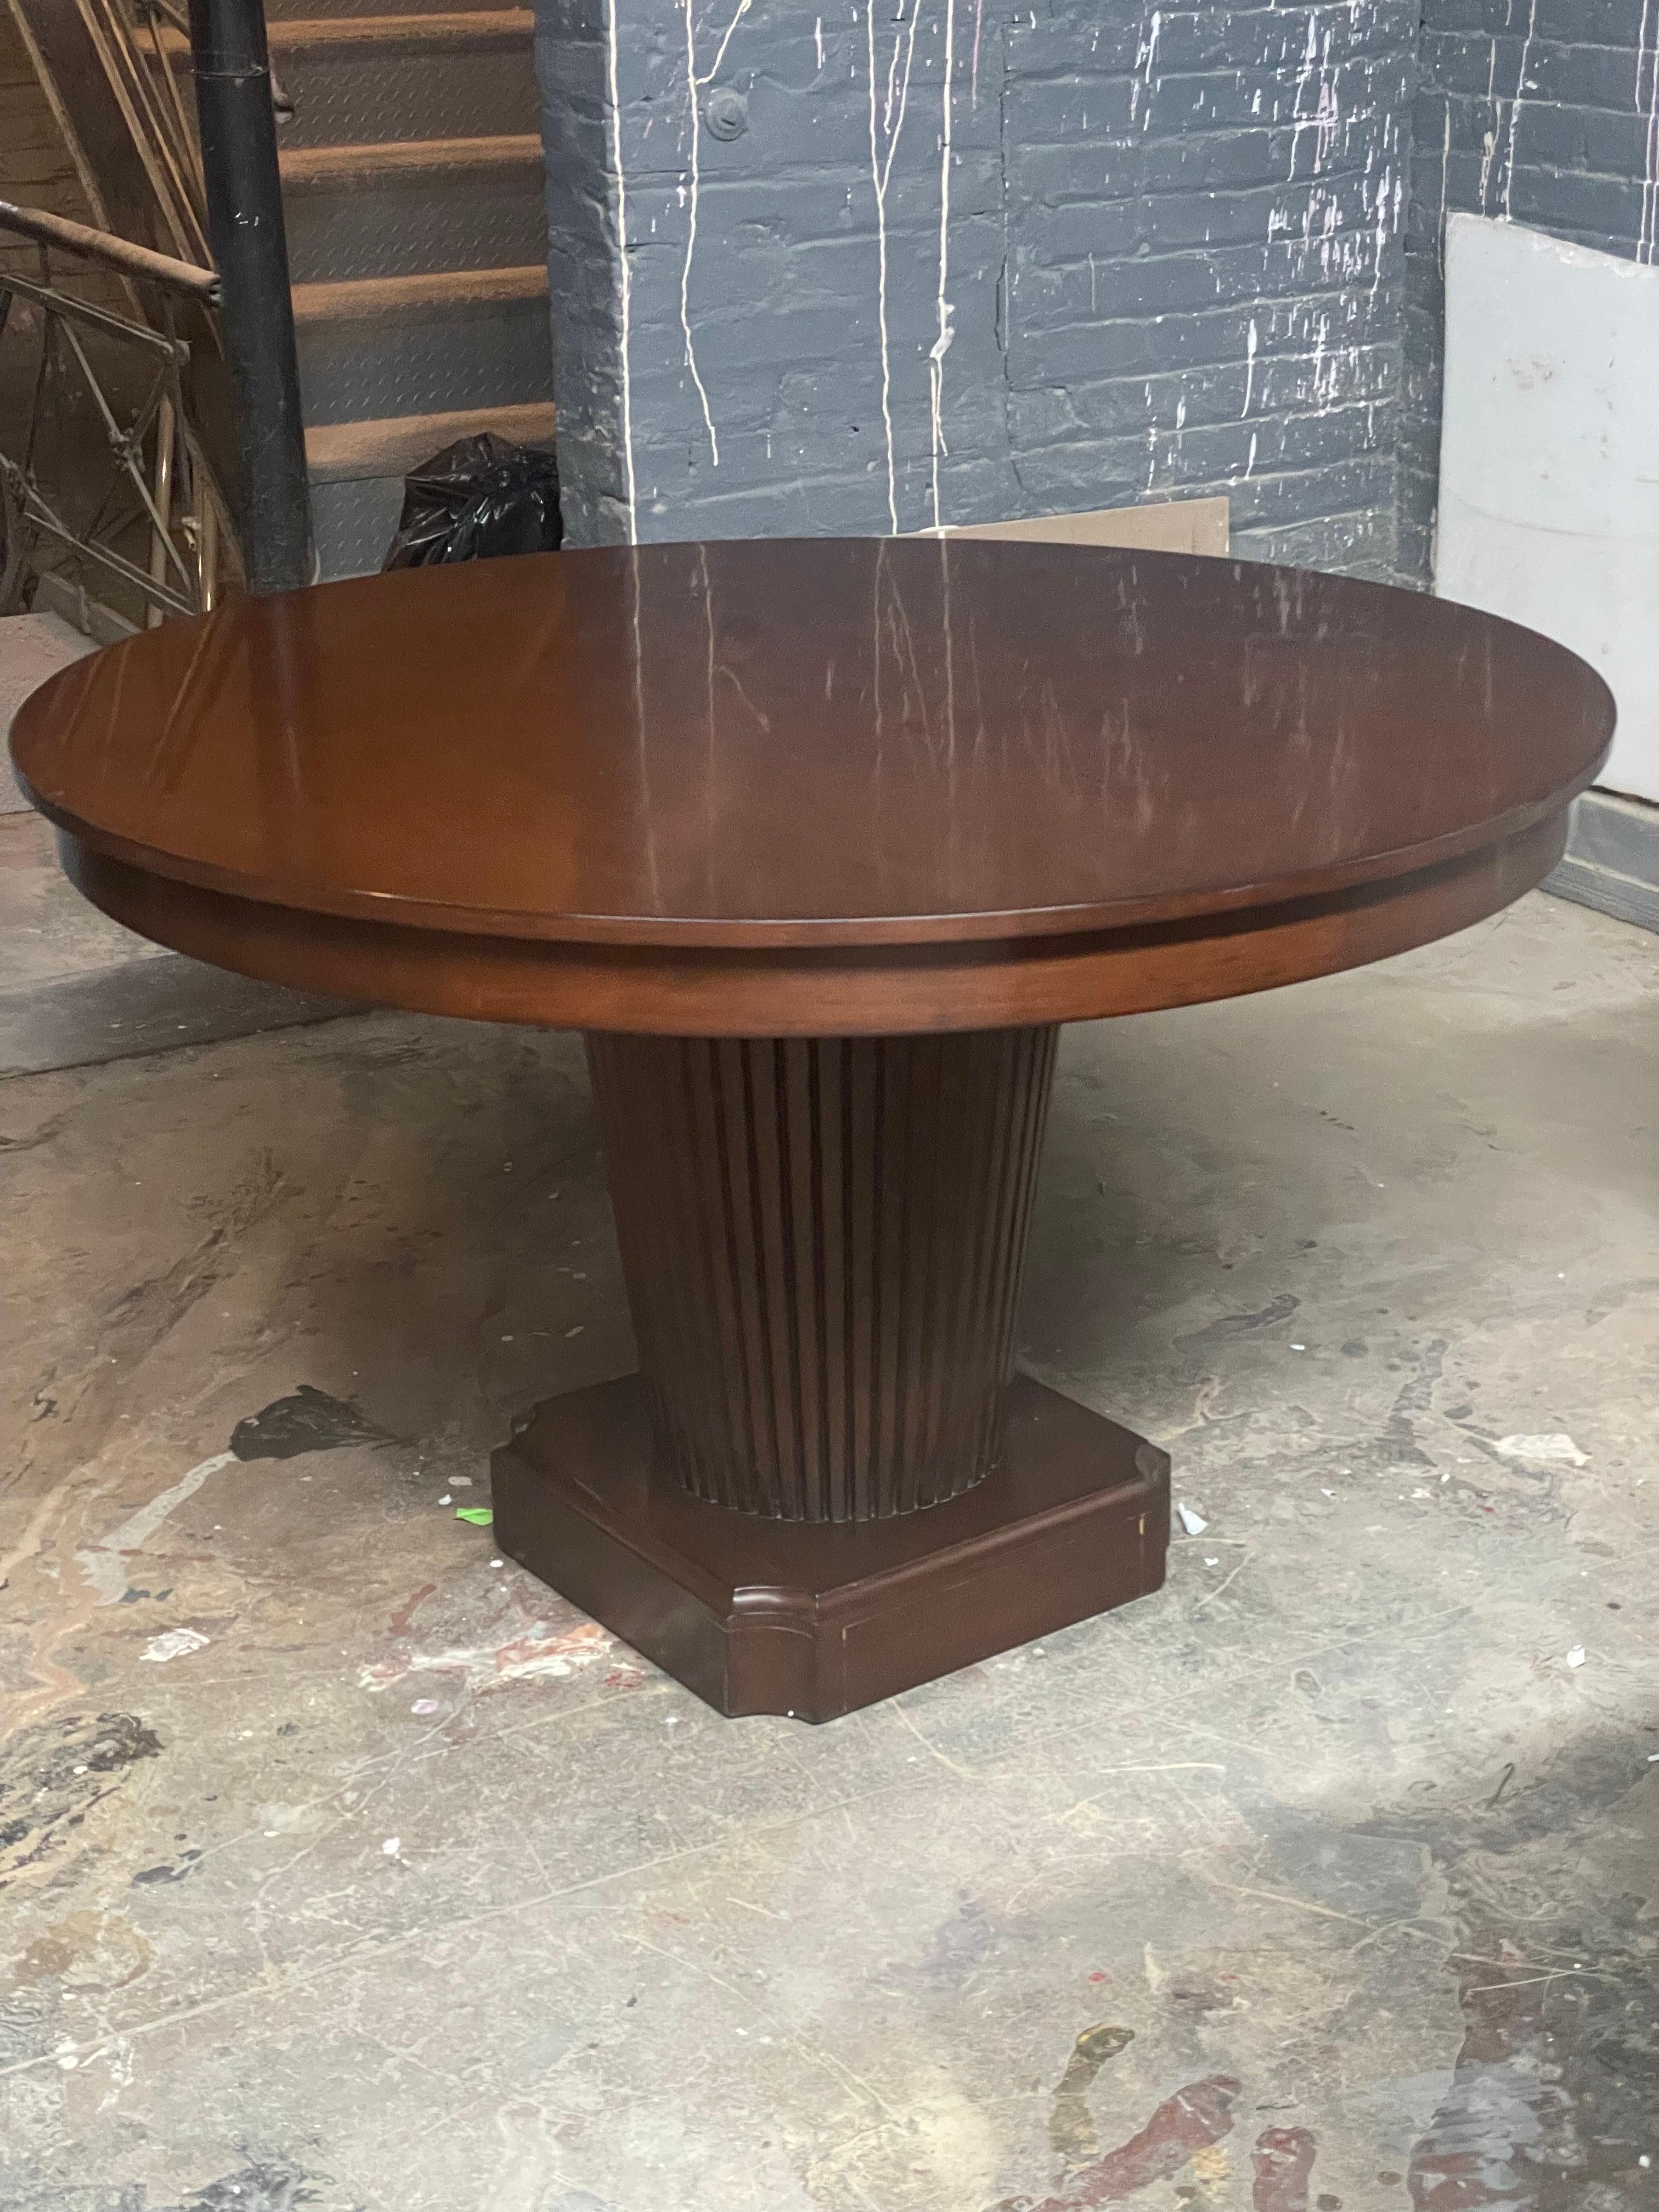 This French estate table has been found among a 